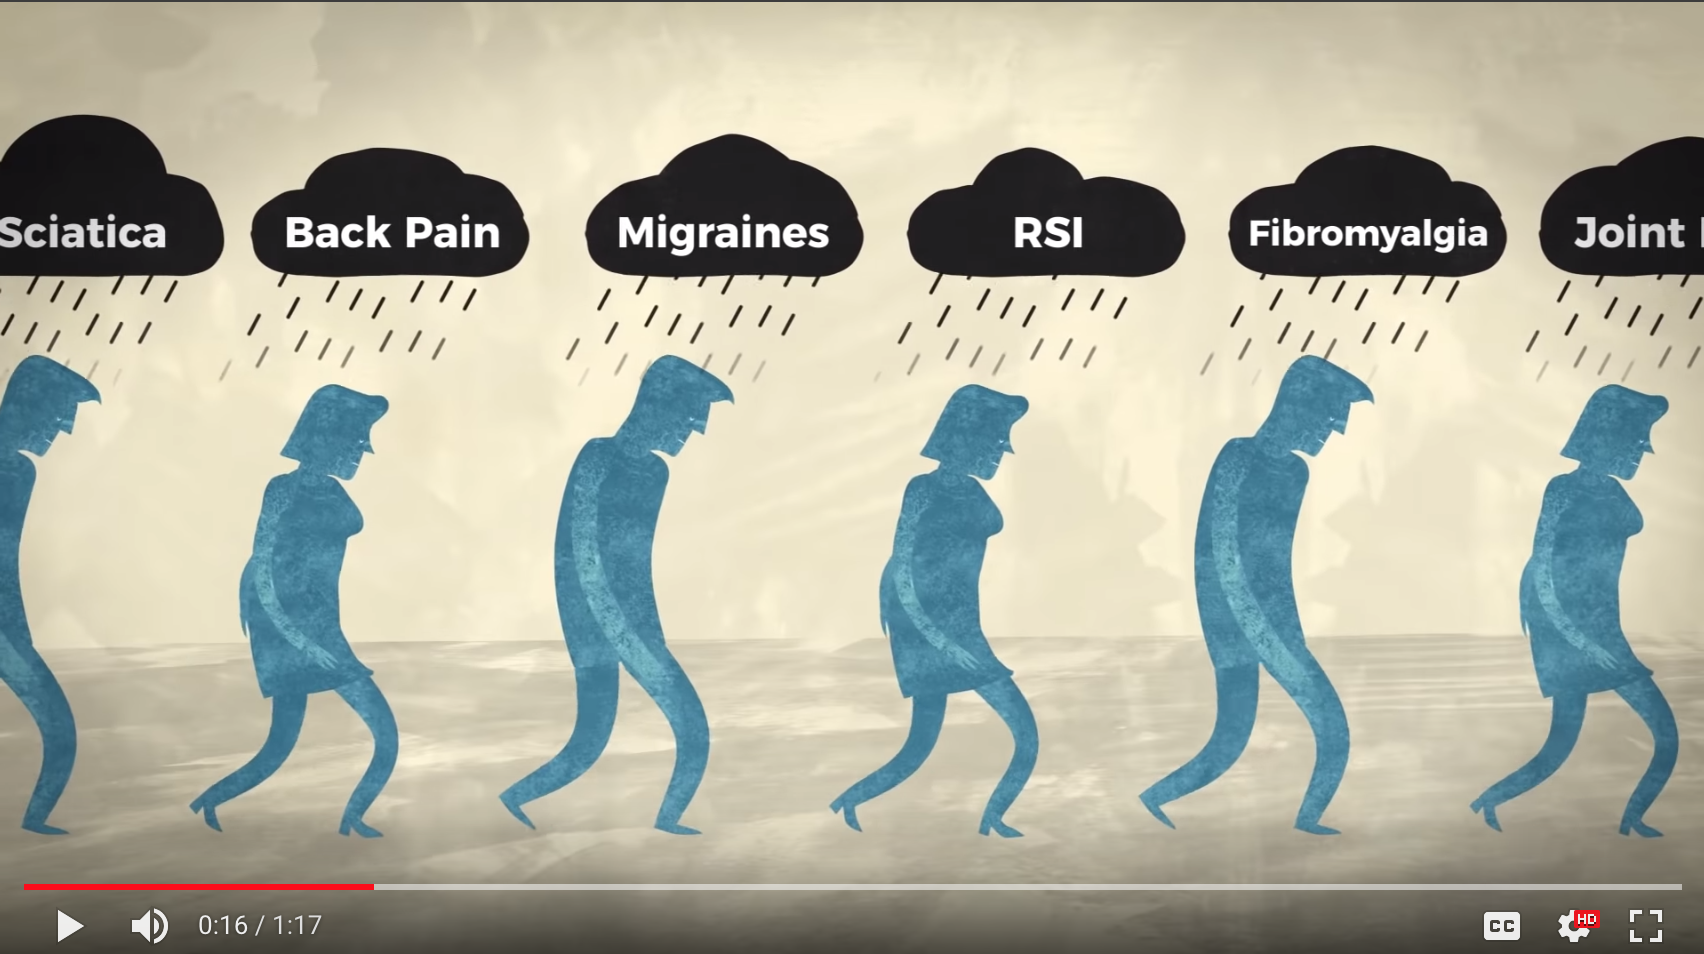 Shows figures walking under storm clouds with the words sciatica, back pain, migraines